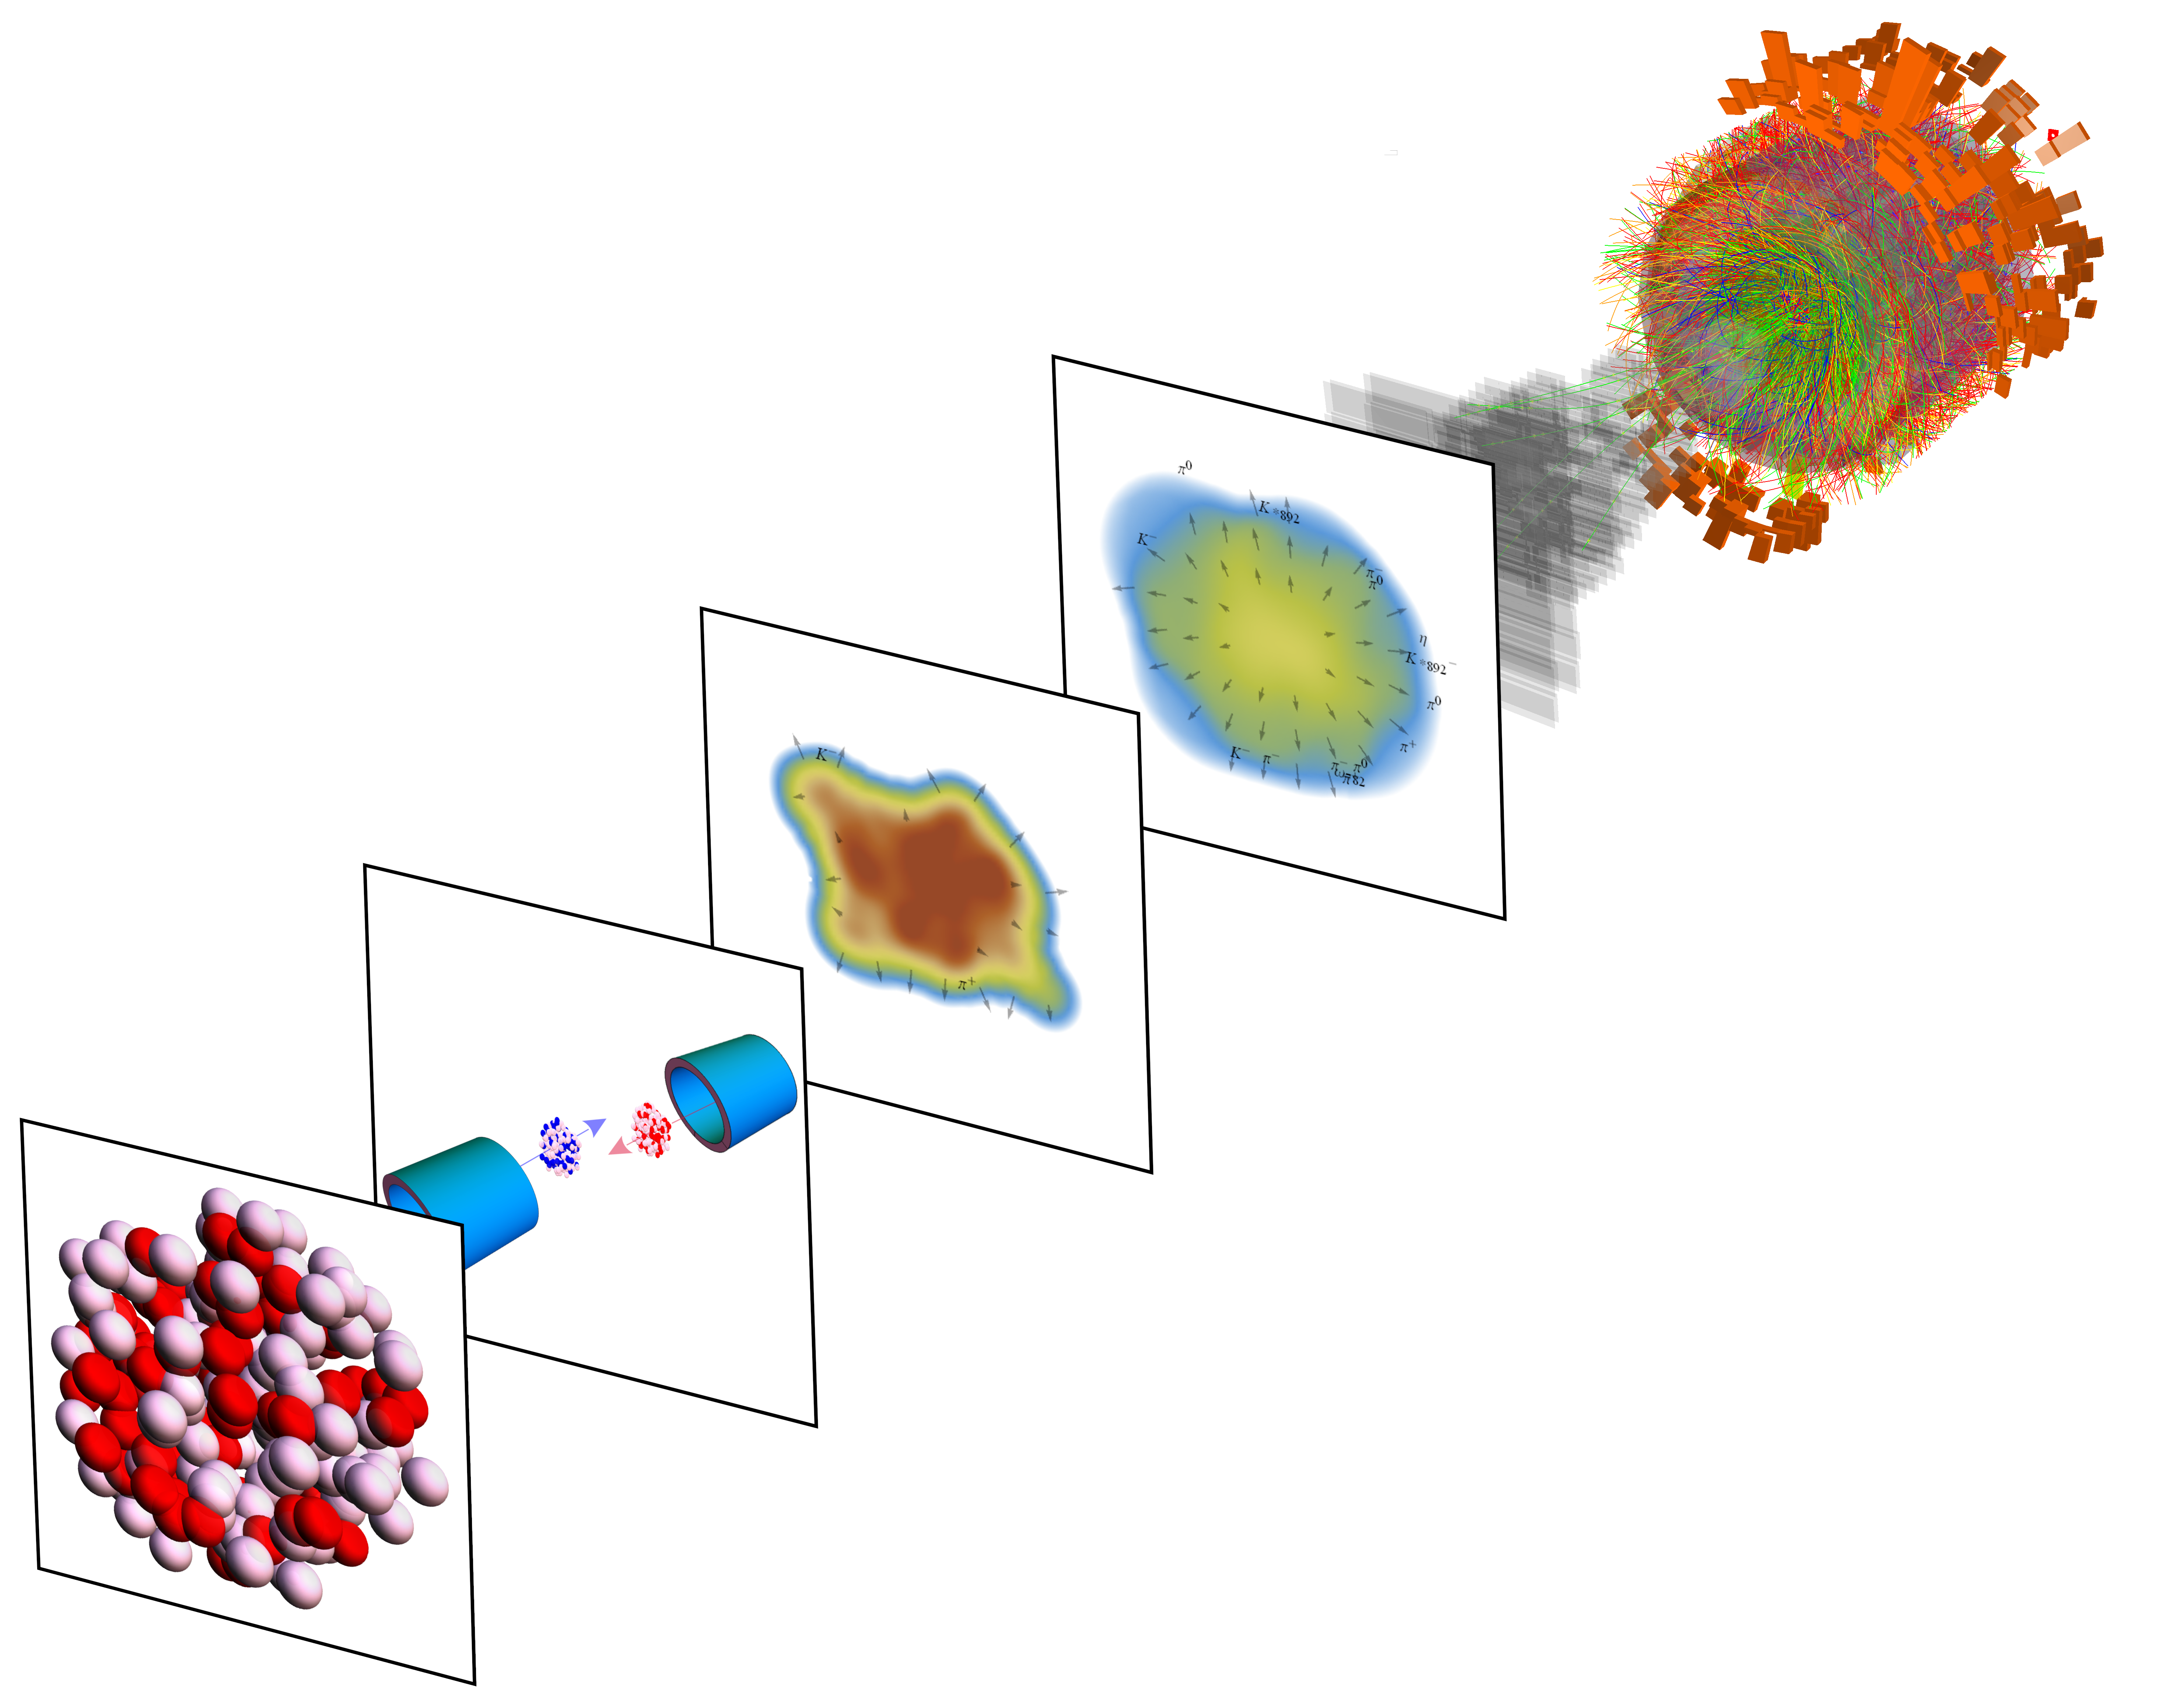 When lead nuclei (left) are collided, the neutron distribution affects the shape of the quark–gluon plasma matter produced (middle), leaving measurable imprints in the distributions of detected particles (right). 